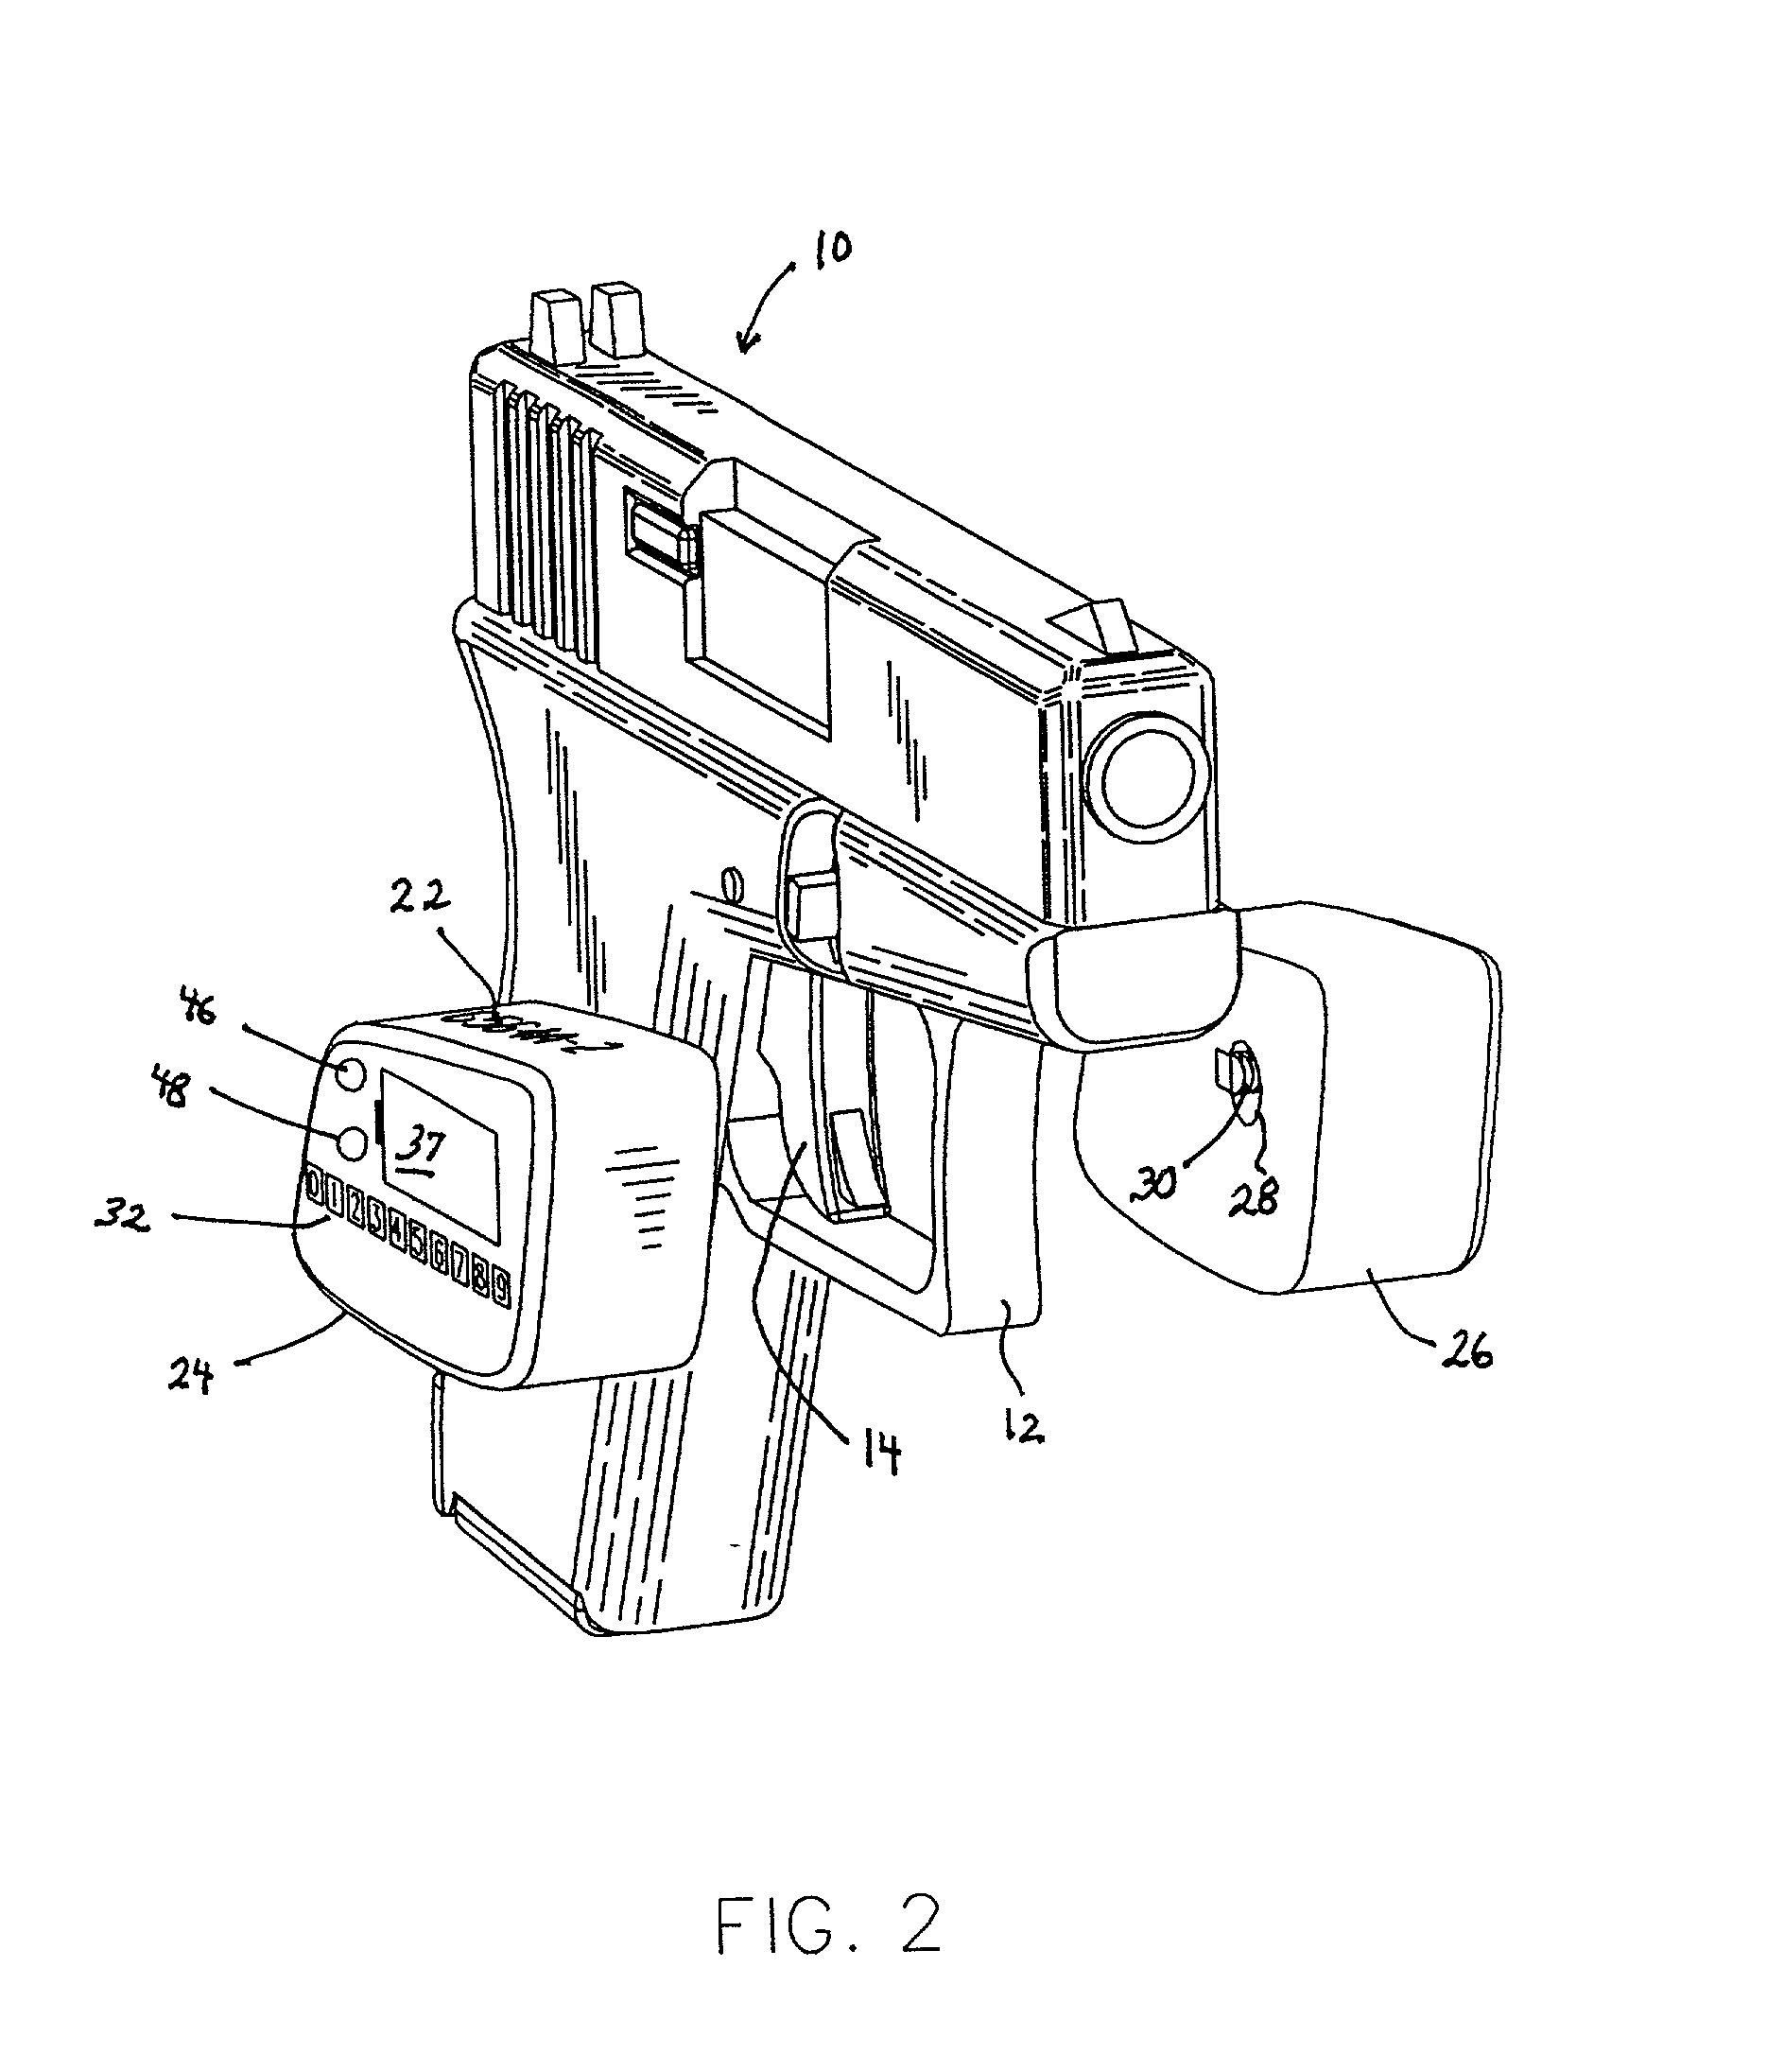 Electronic trigger lock apparatus and system